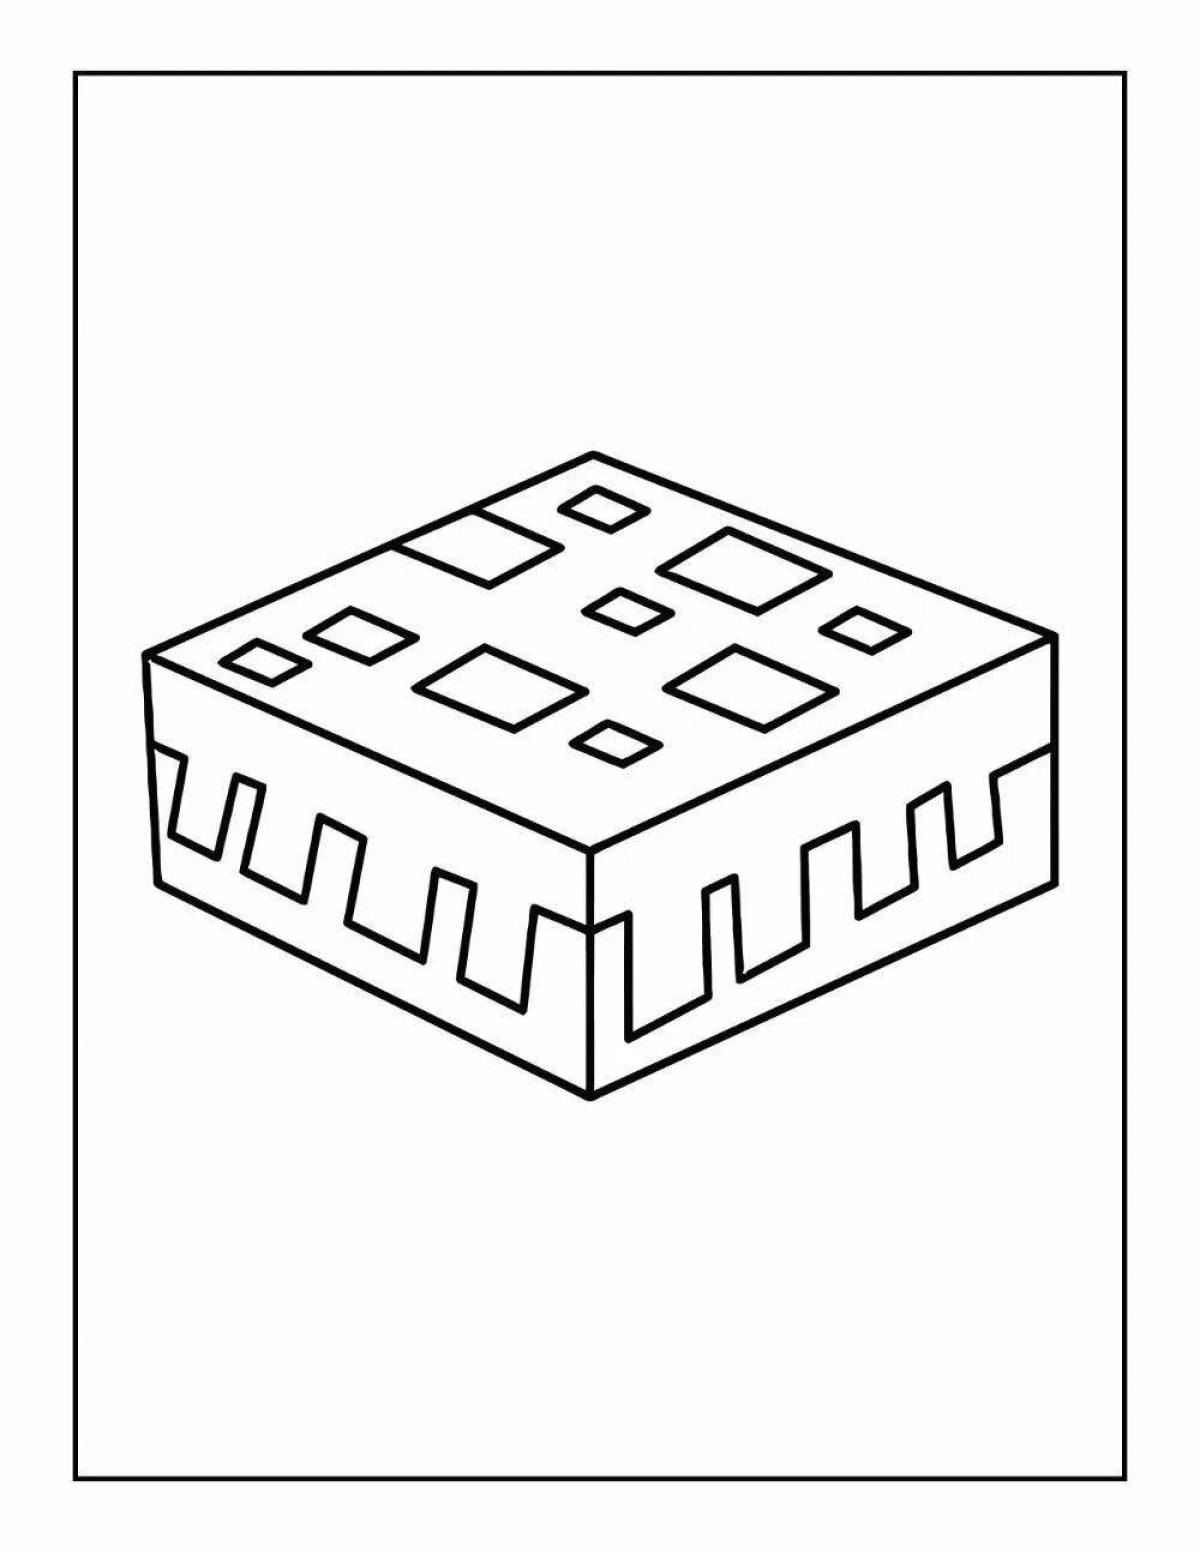 Playful minecraft chest coloring page